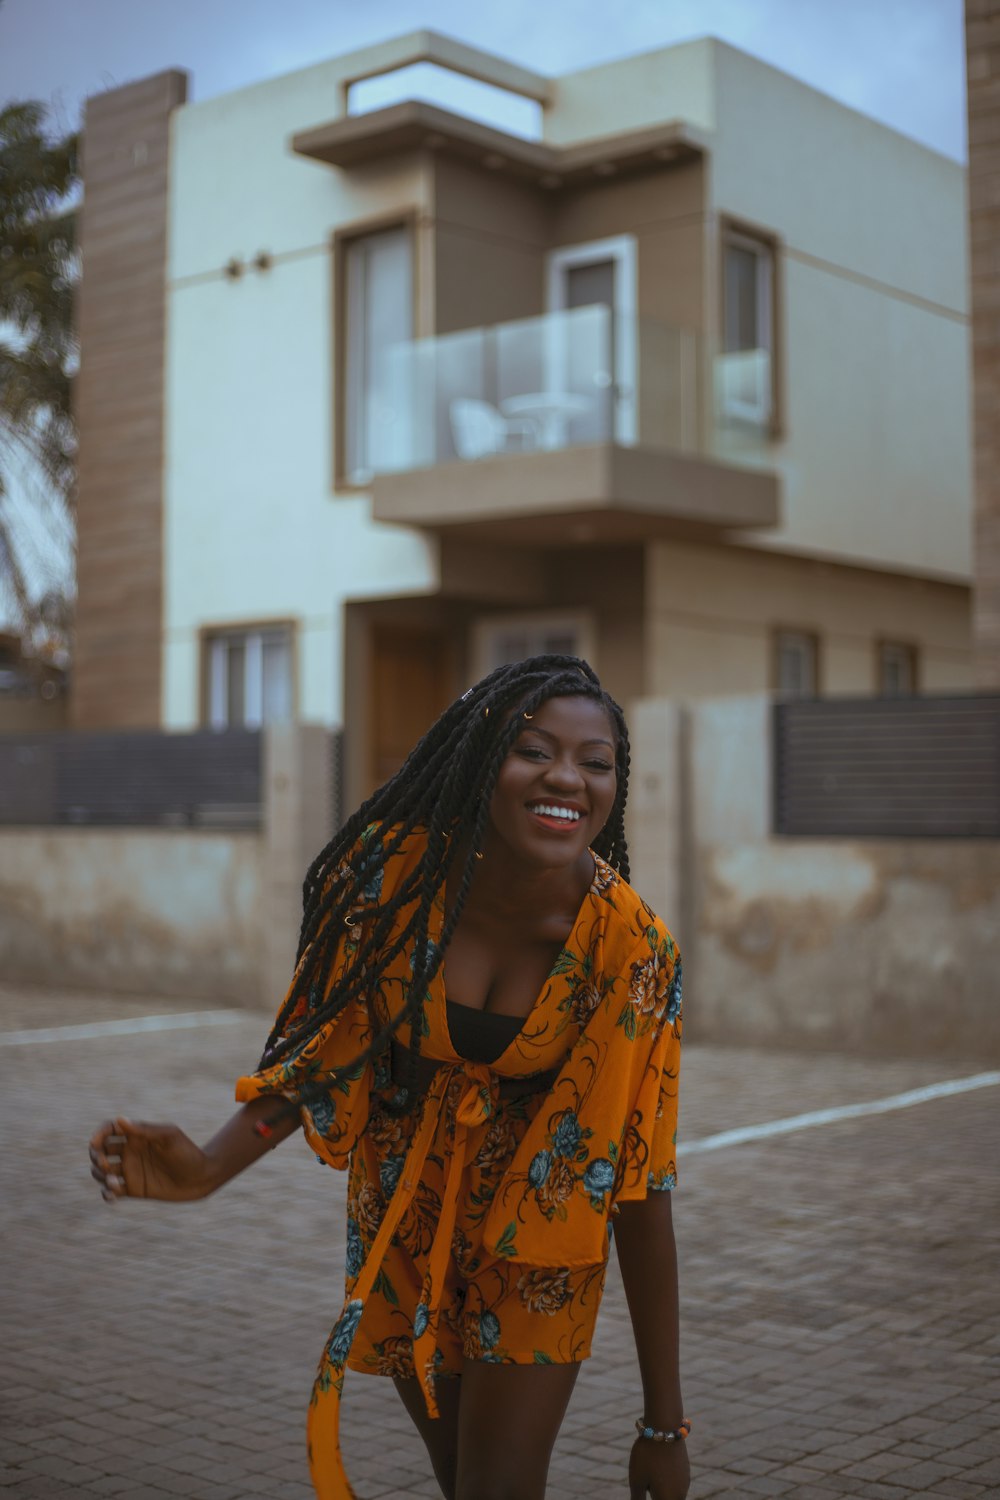 a woman with dreadlocks walking in front of a house